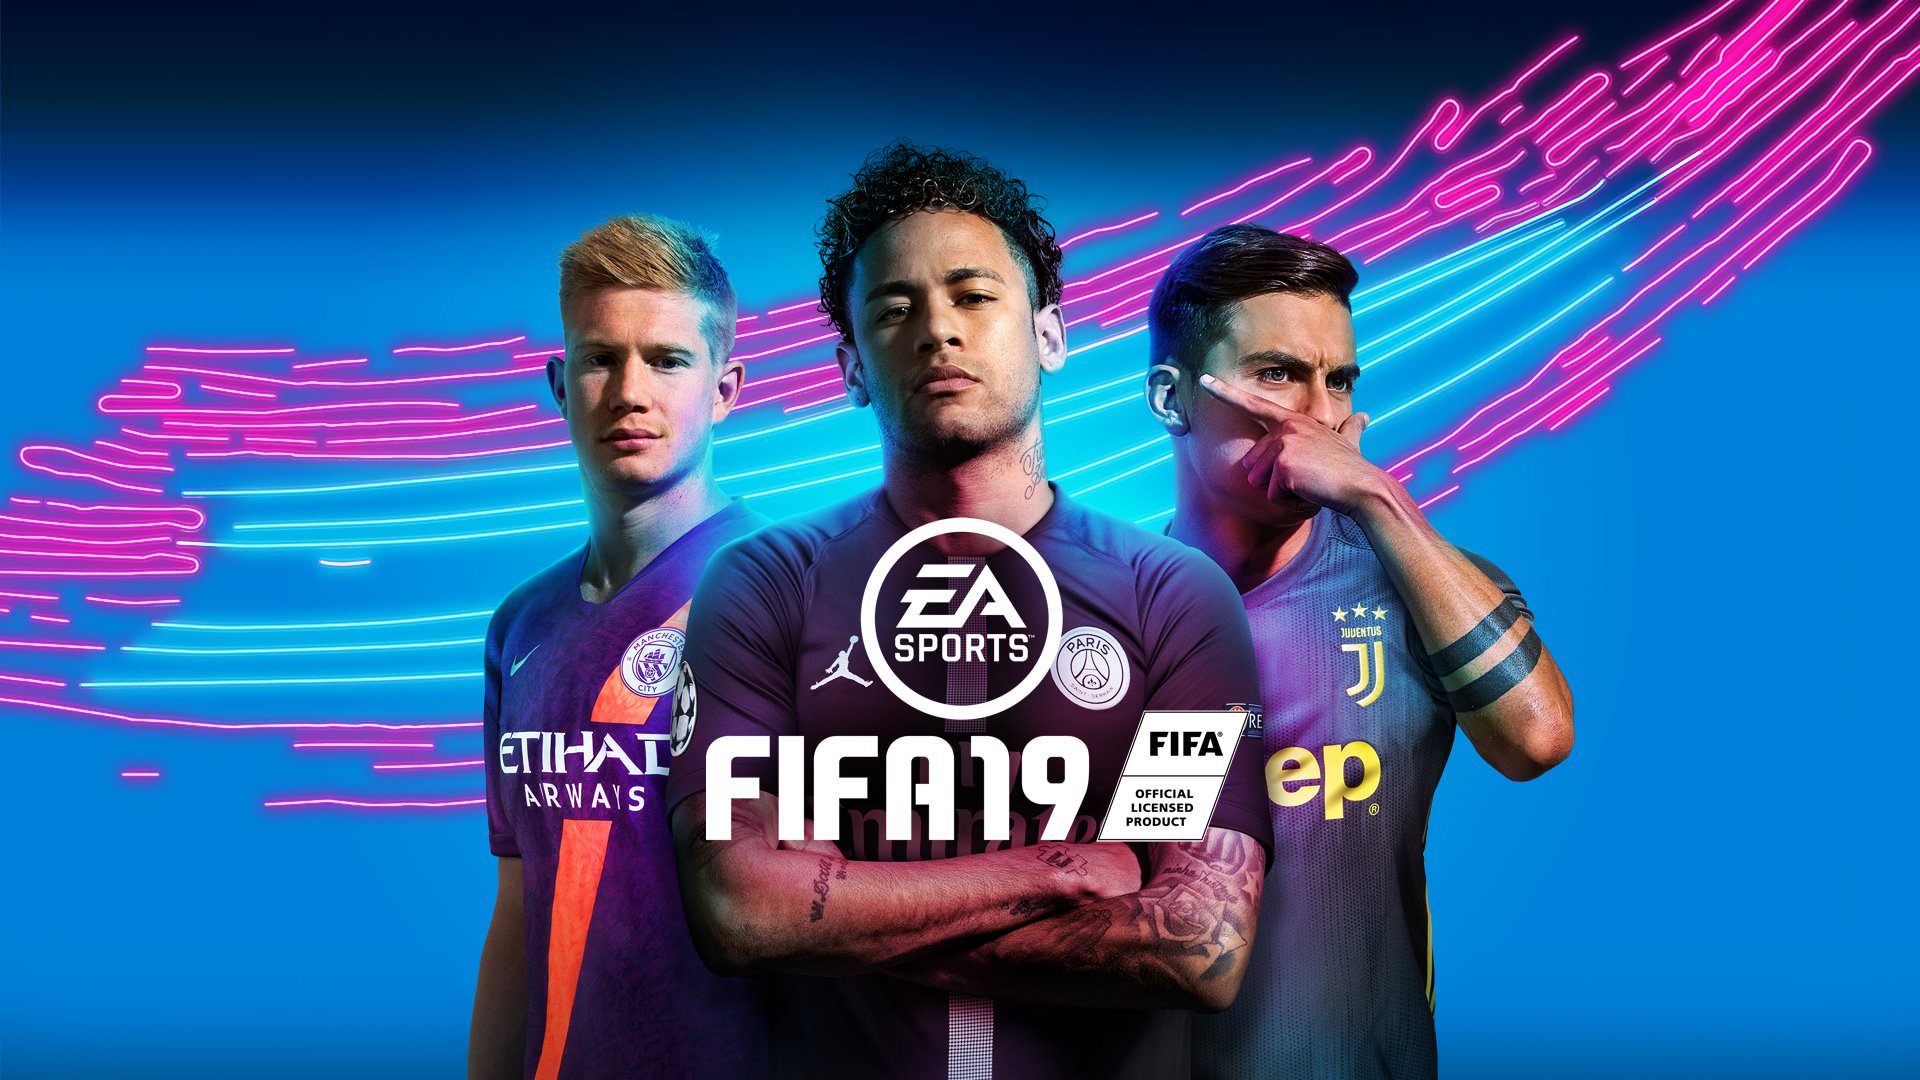 FIFA 19 Content Update – New UEFA Champions League Content and Neymar as the Cover Star